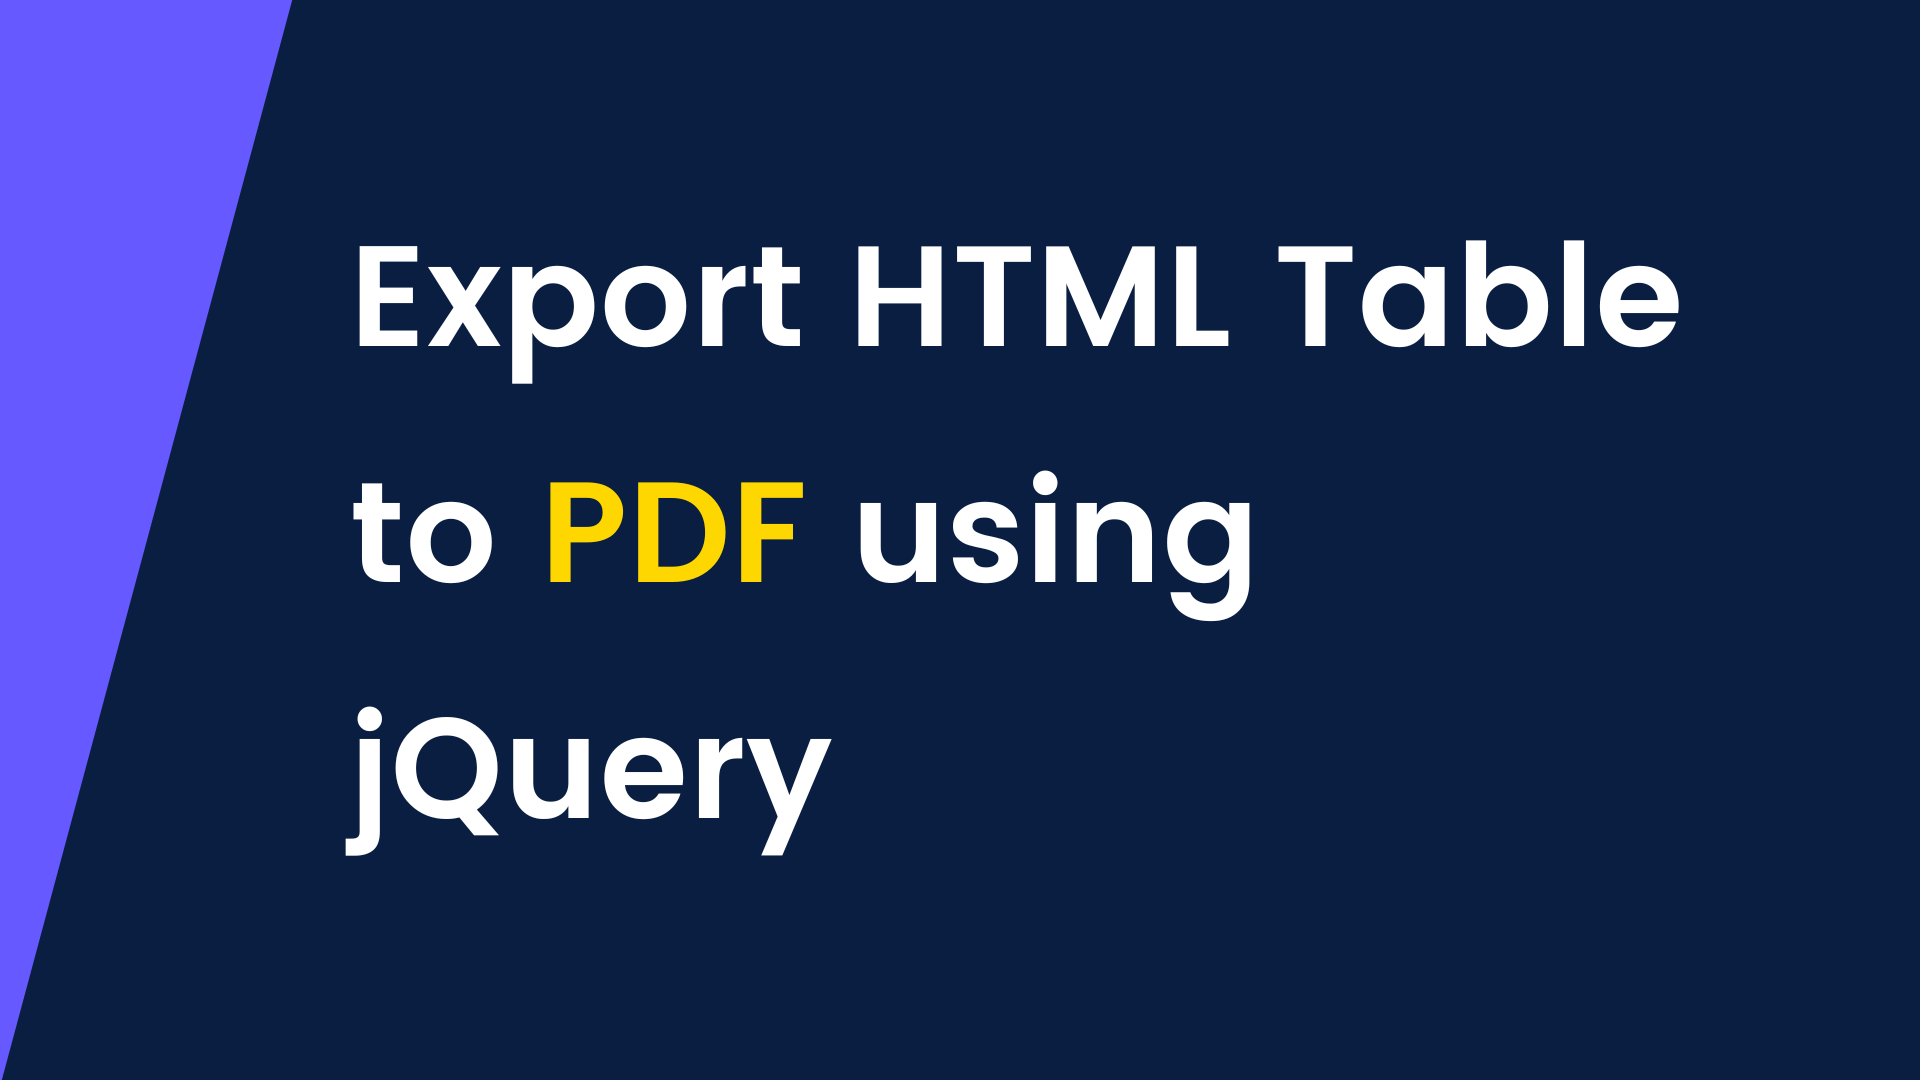 Export HTML Table to PDF using jQuery